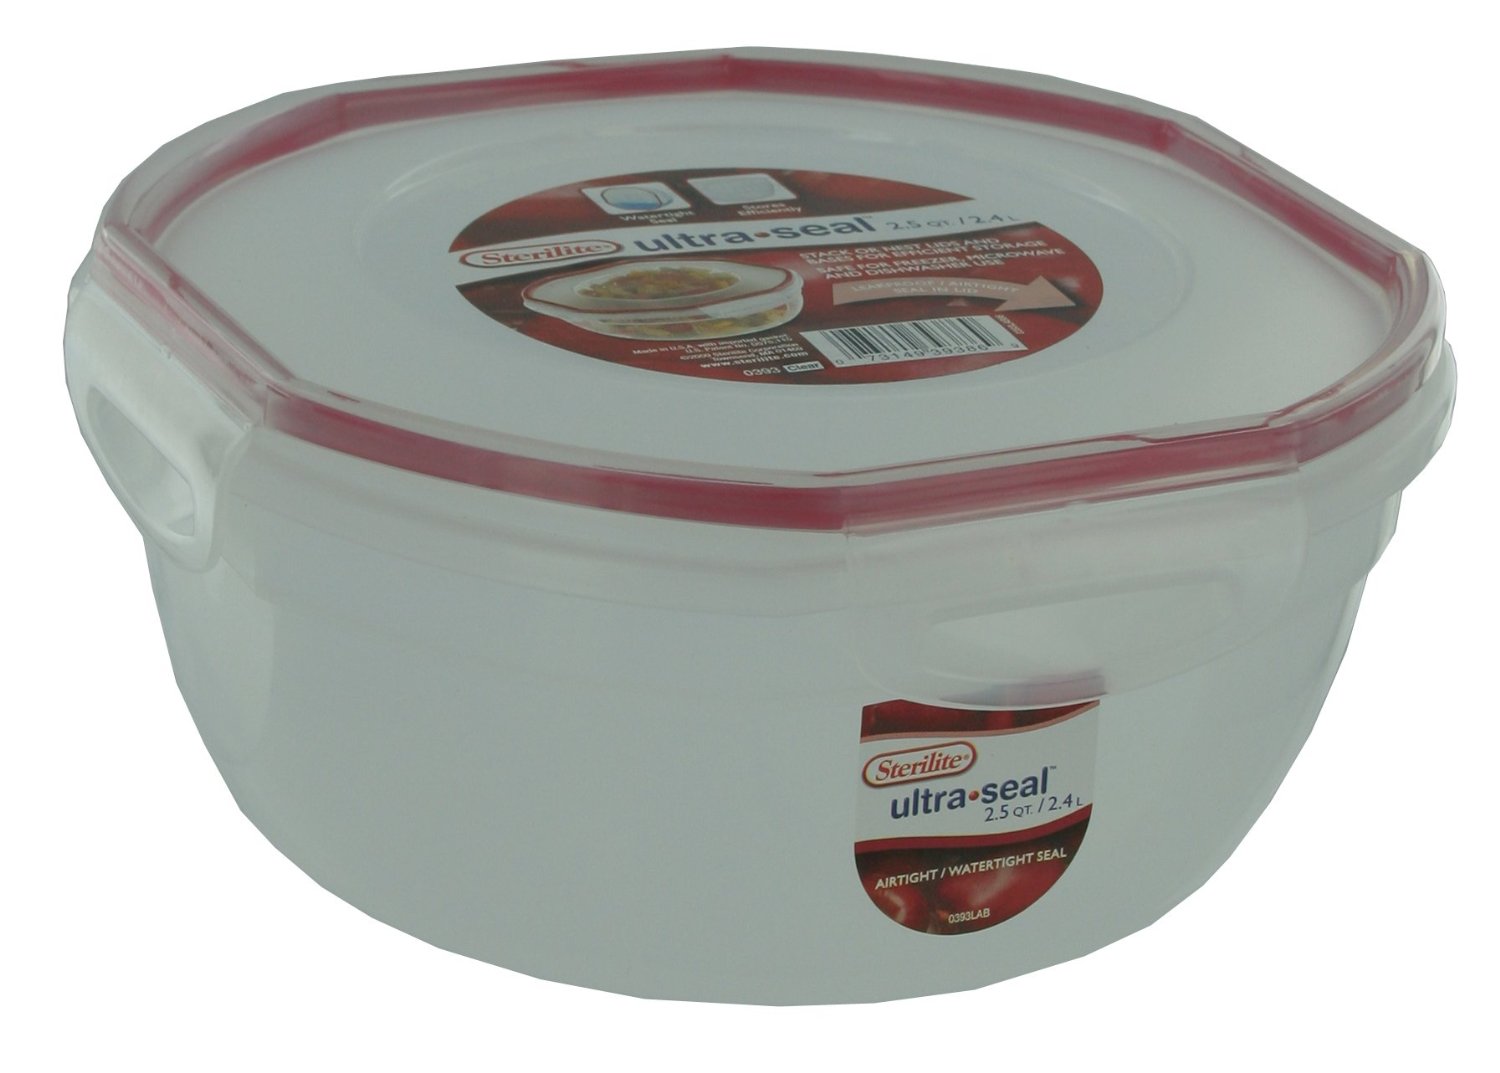 Sterilite Red Ultraseal Latching Bowl 2.5Qt 1pc – The Cuisinet